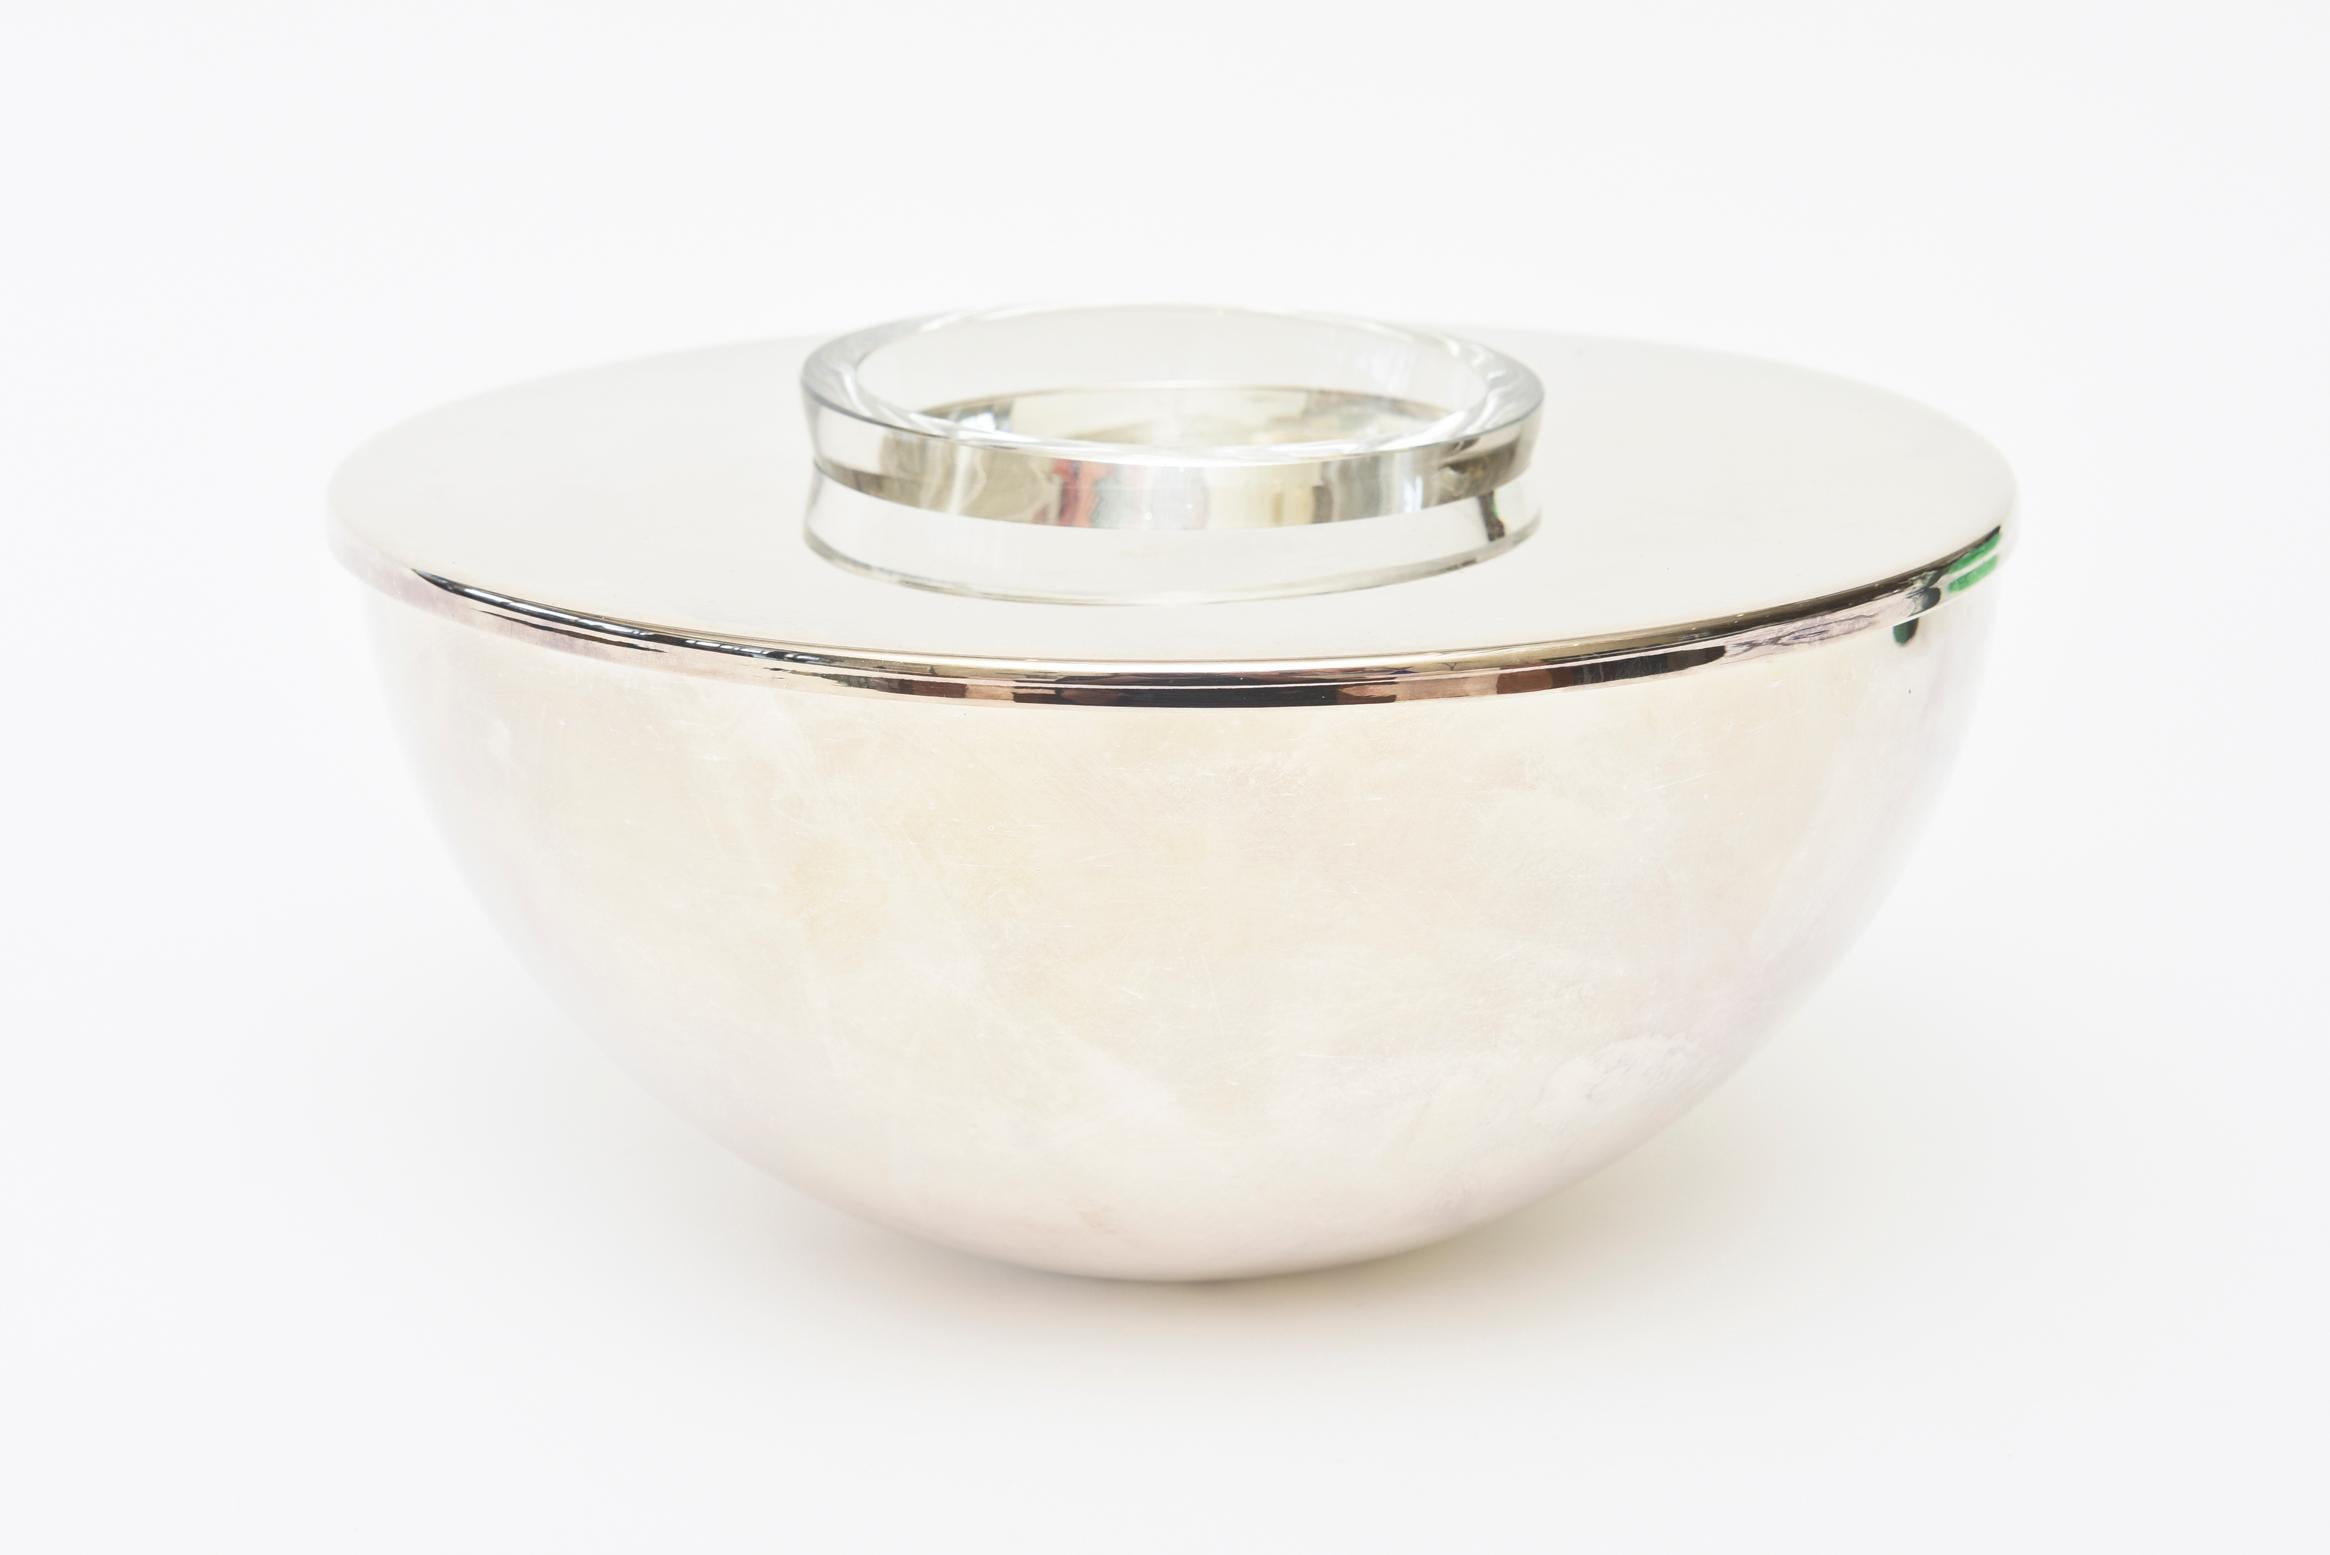 This chic and modernist 1980s silver plate caviar serving bowl and or barware is hallmarked Calvin Klein- Swid Powell. It comes with a mother of pearl serving spoon as an added bonus serving piece. The bowl was manufactured in Hong Kong and the